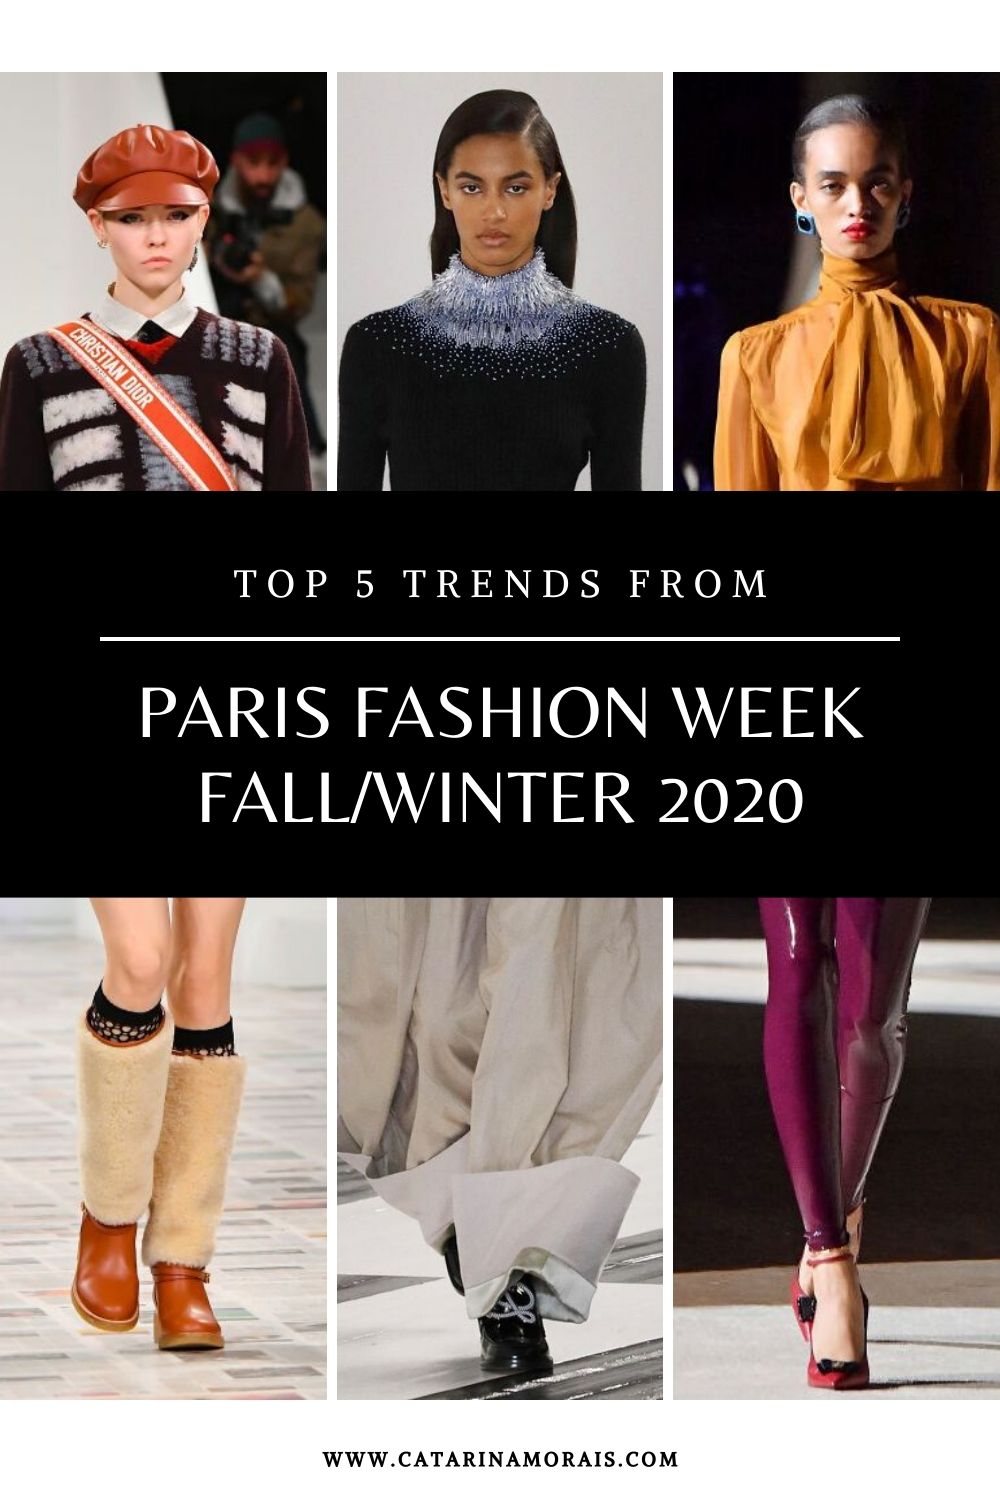 TOP 5 TRENDS FROM PFW F/W